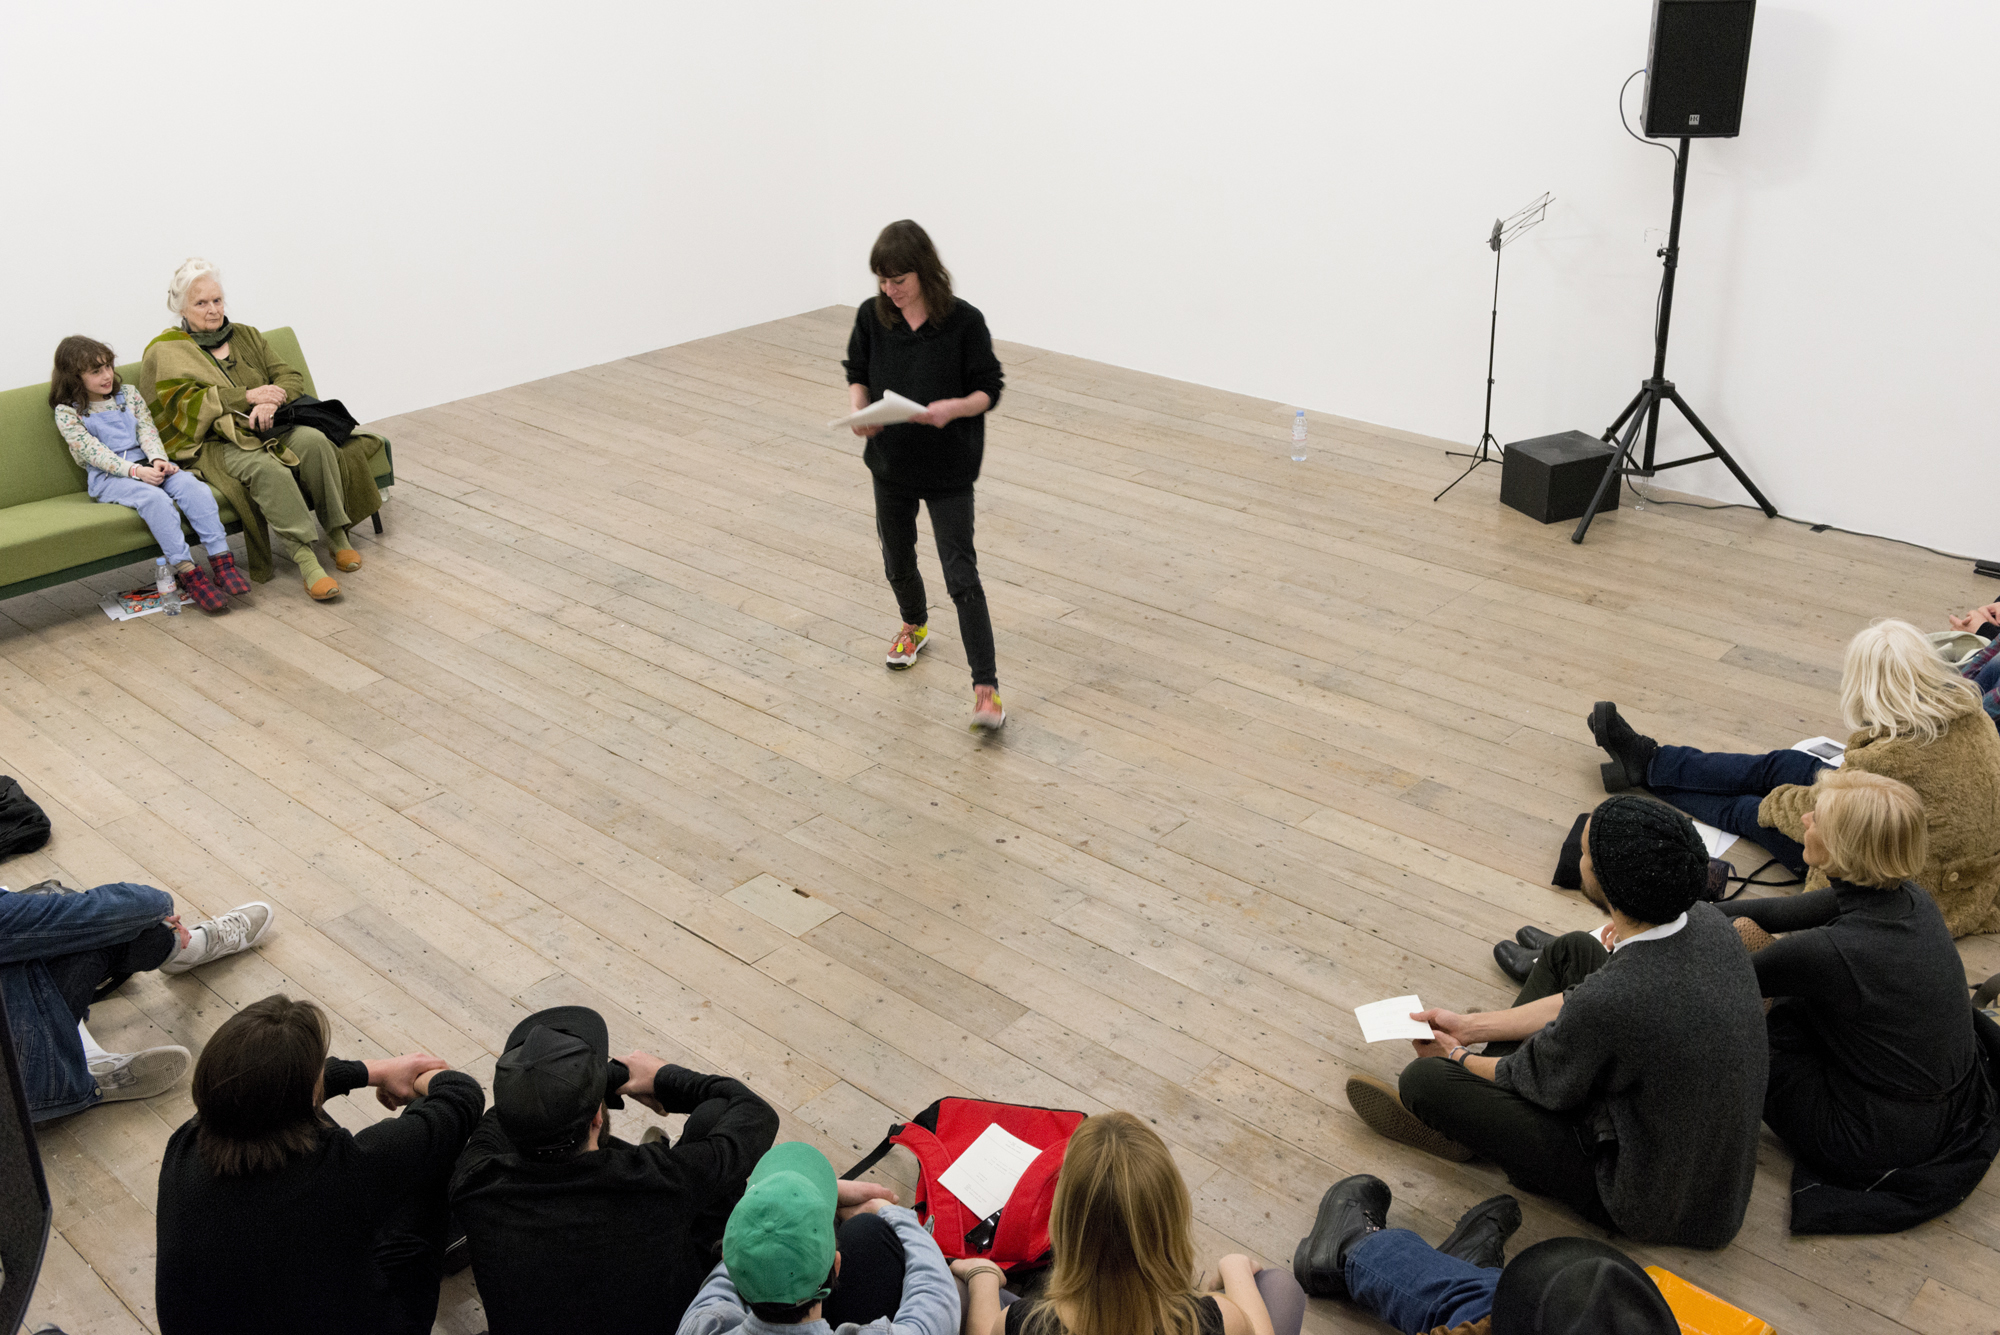 John Latham, 'Lectures', performed by Sue Tompkins (JOHN LATHAM'S LECTURES AT RAVEN ROW 7)